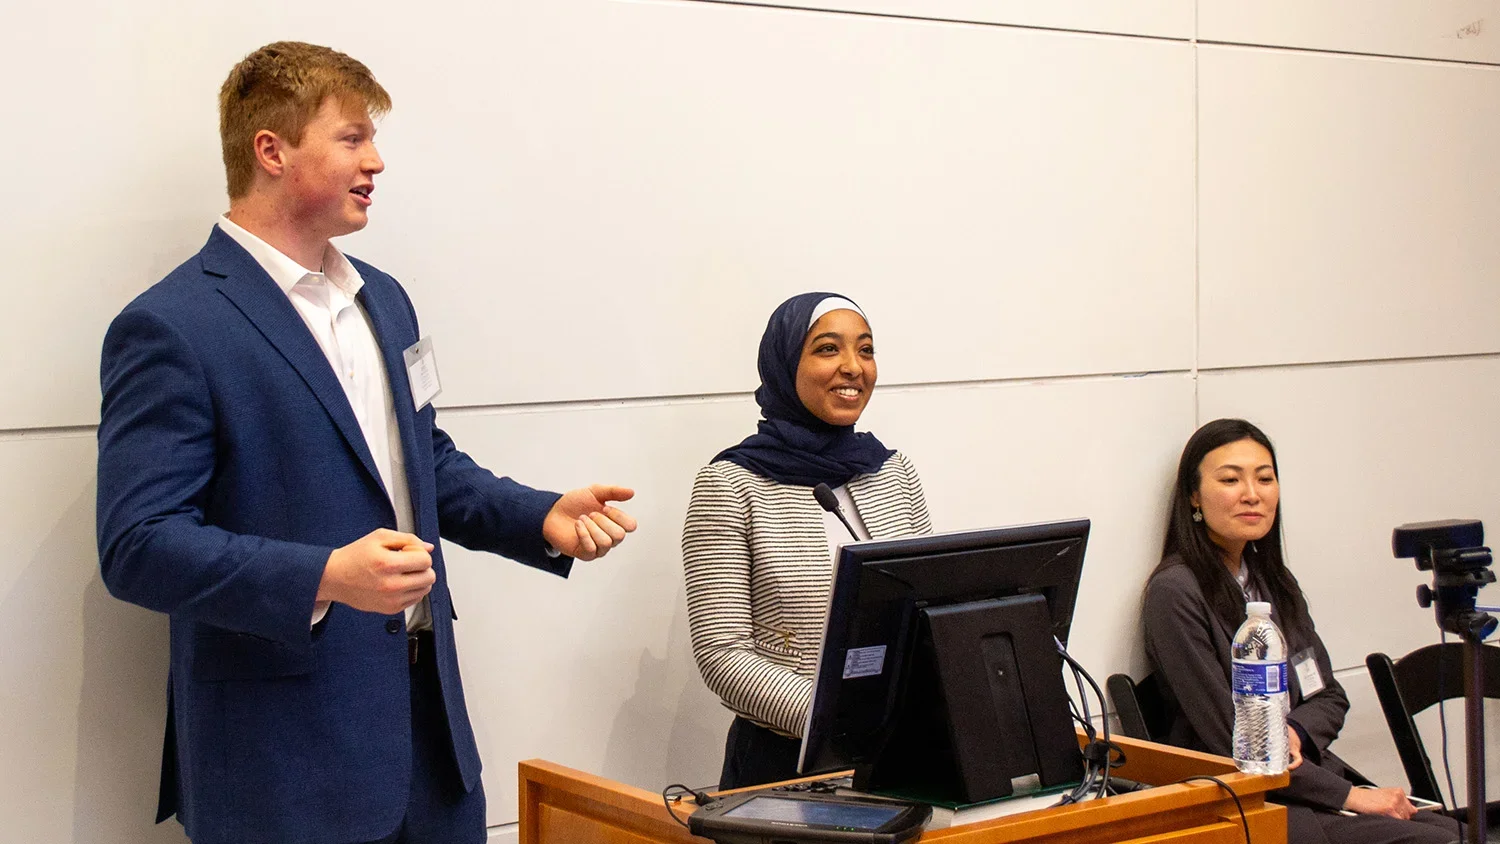 Student presenters stand at the podium during the "Food as Medicine" conference.